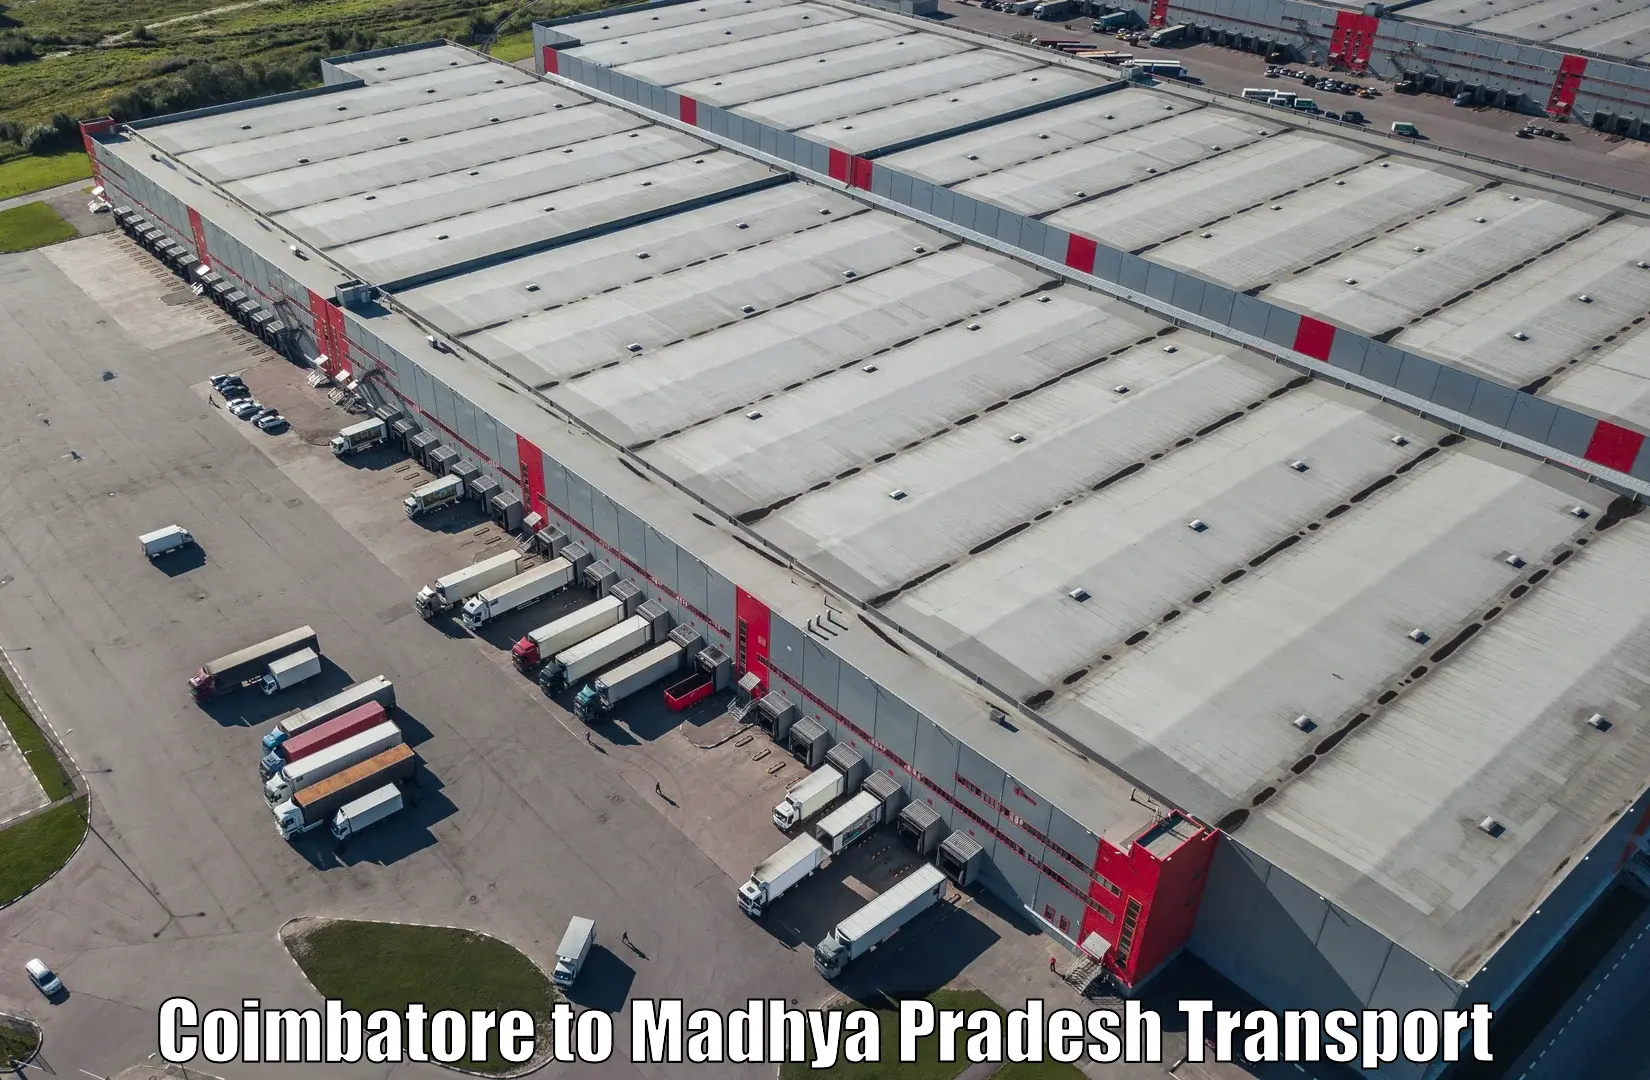 Express transport services Coimbatore to IIT Indore